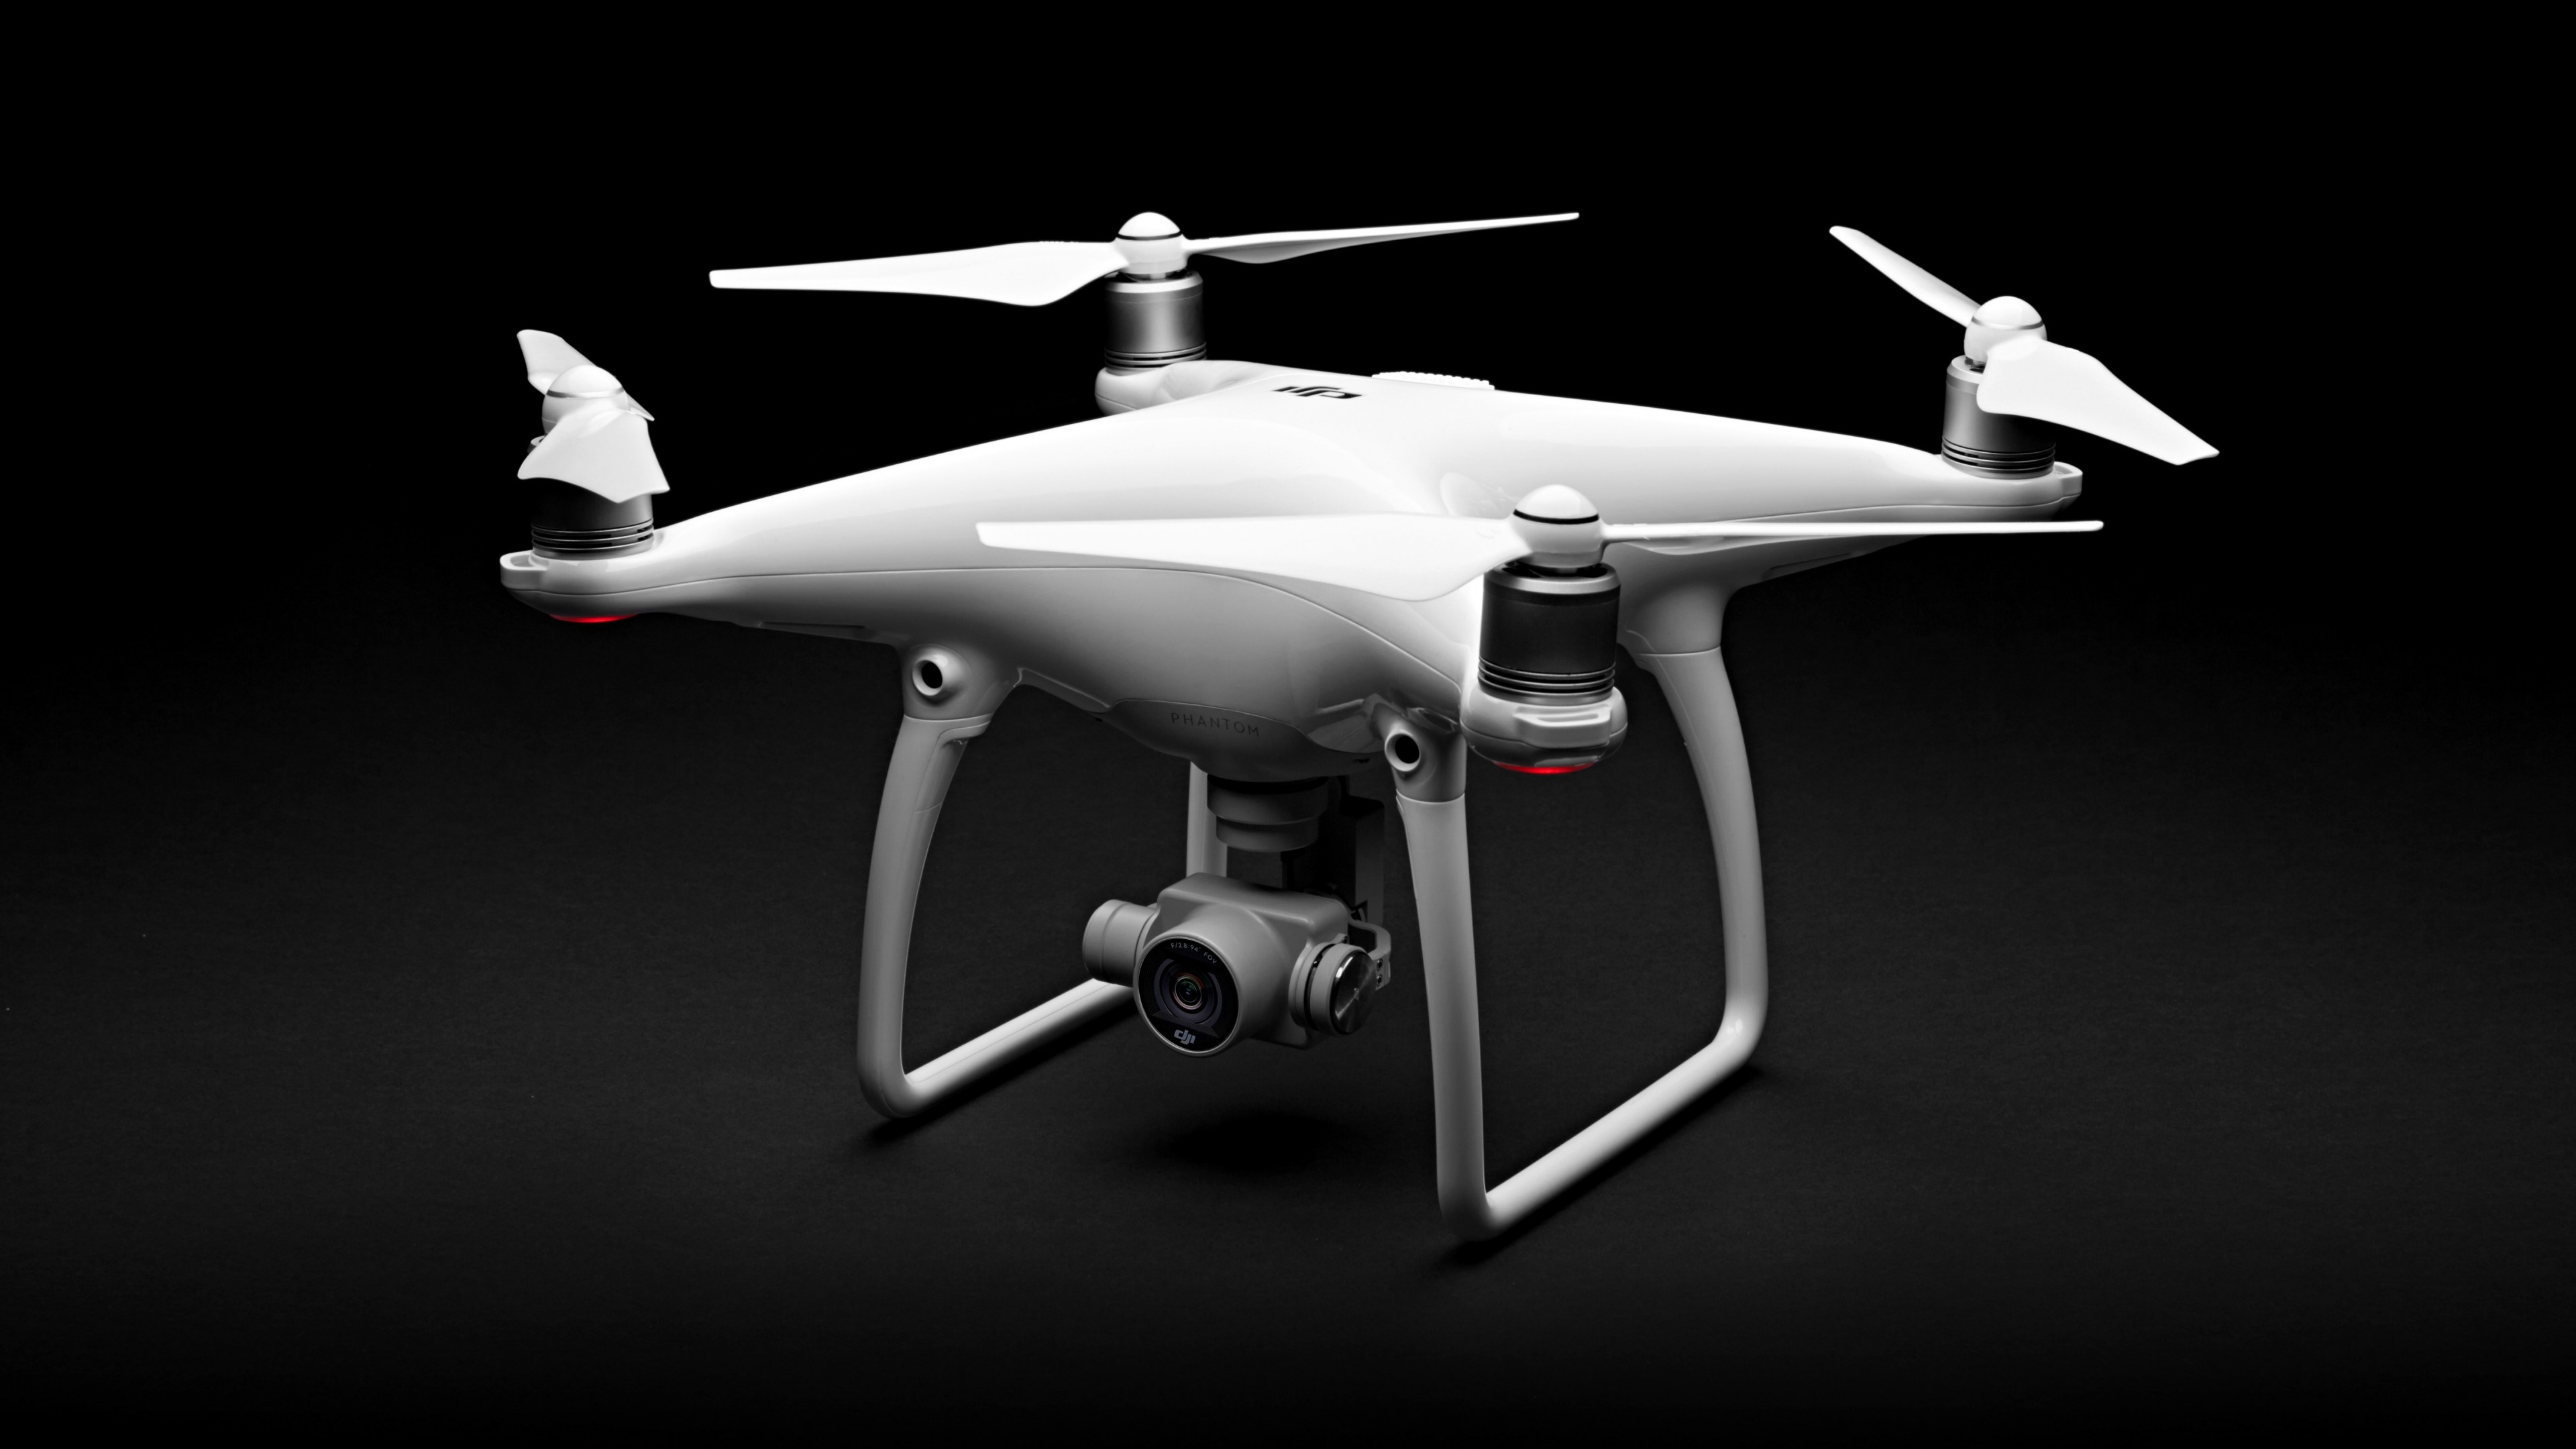 Drone: DJI Phantom 4 Pro, Quadcopter, An aircraft guided by remote control. 3840x2160 4K Background.